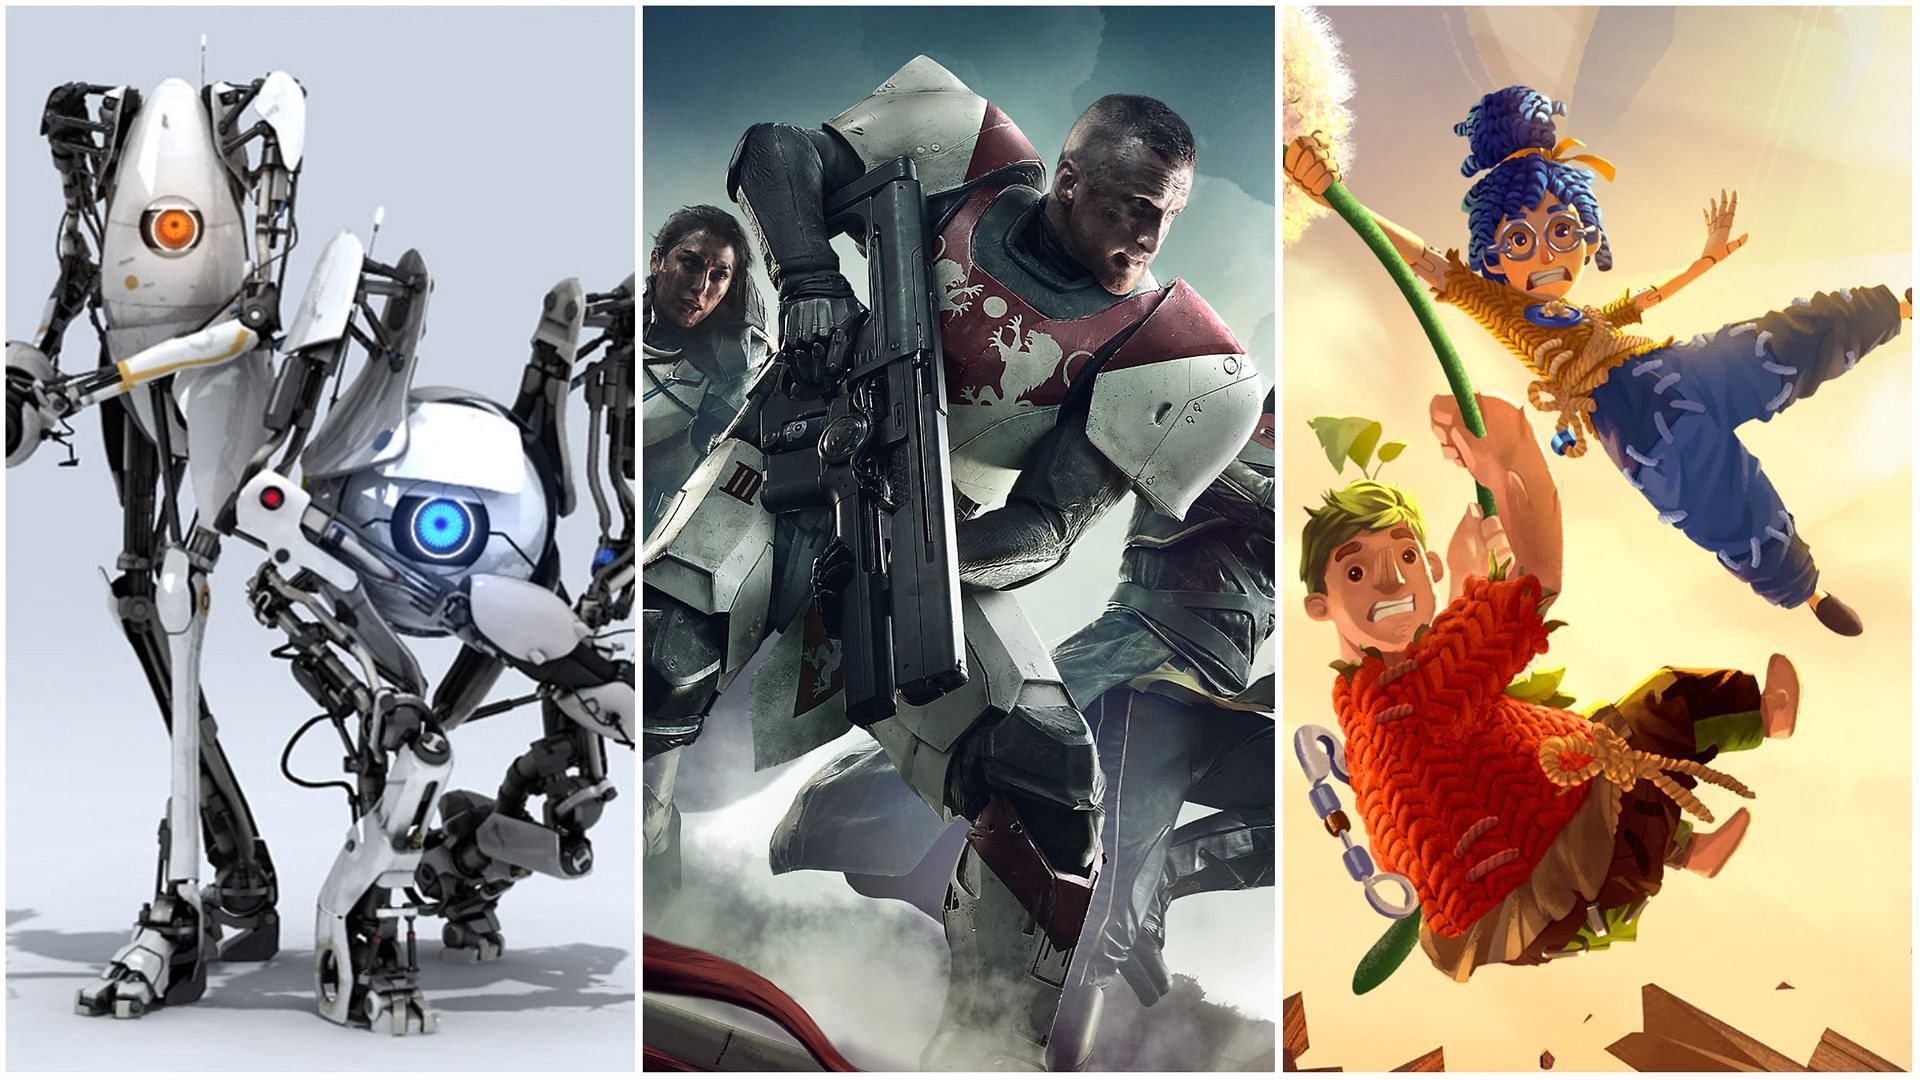 Some great co-op multiplayer games to get into this August (Images via Valve, Bungie, &amp; Hazelight Studios)